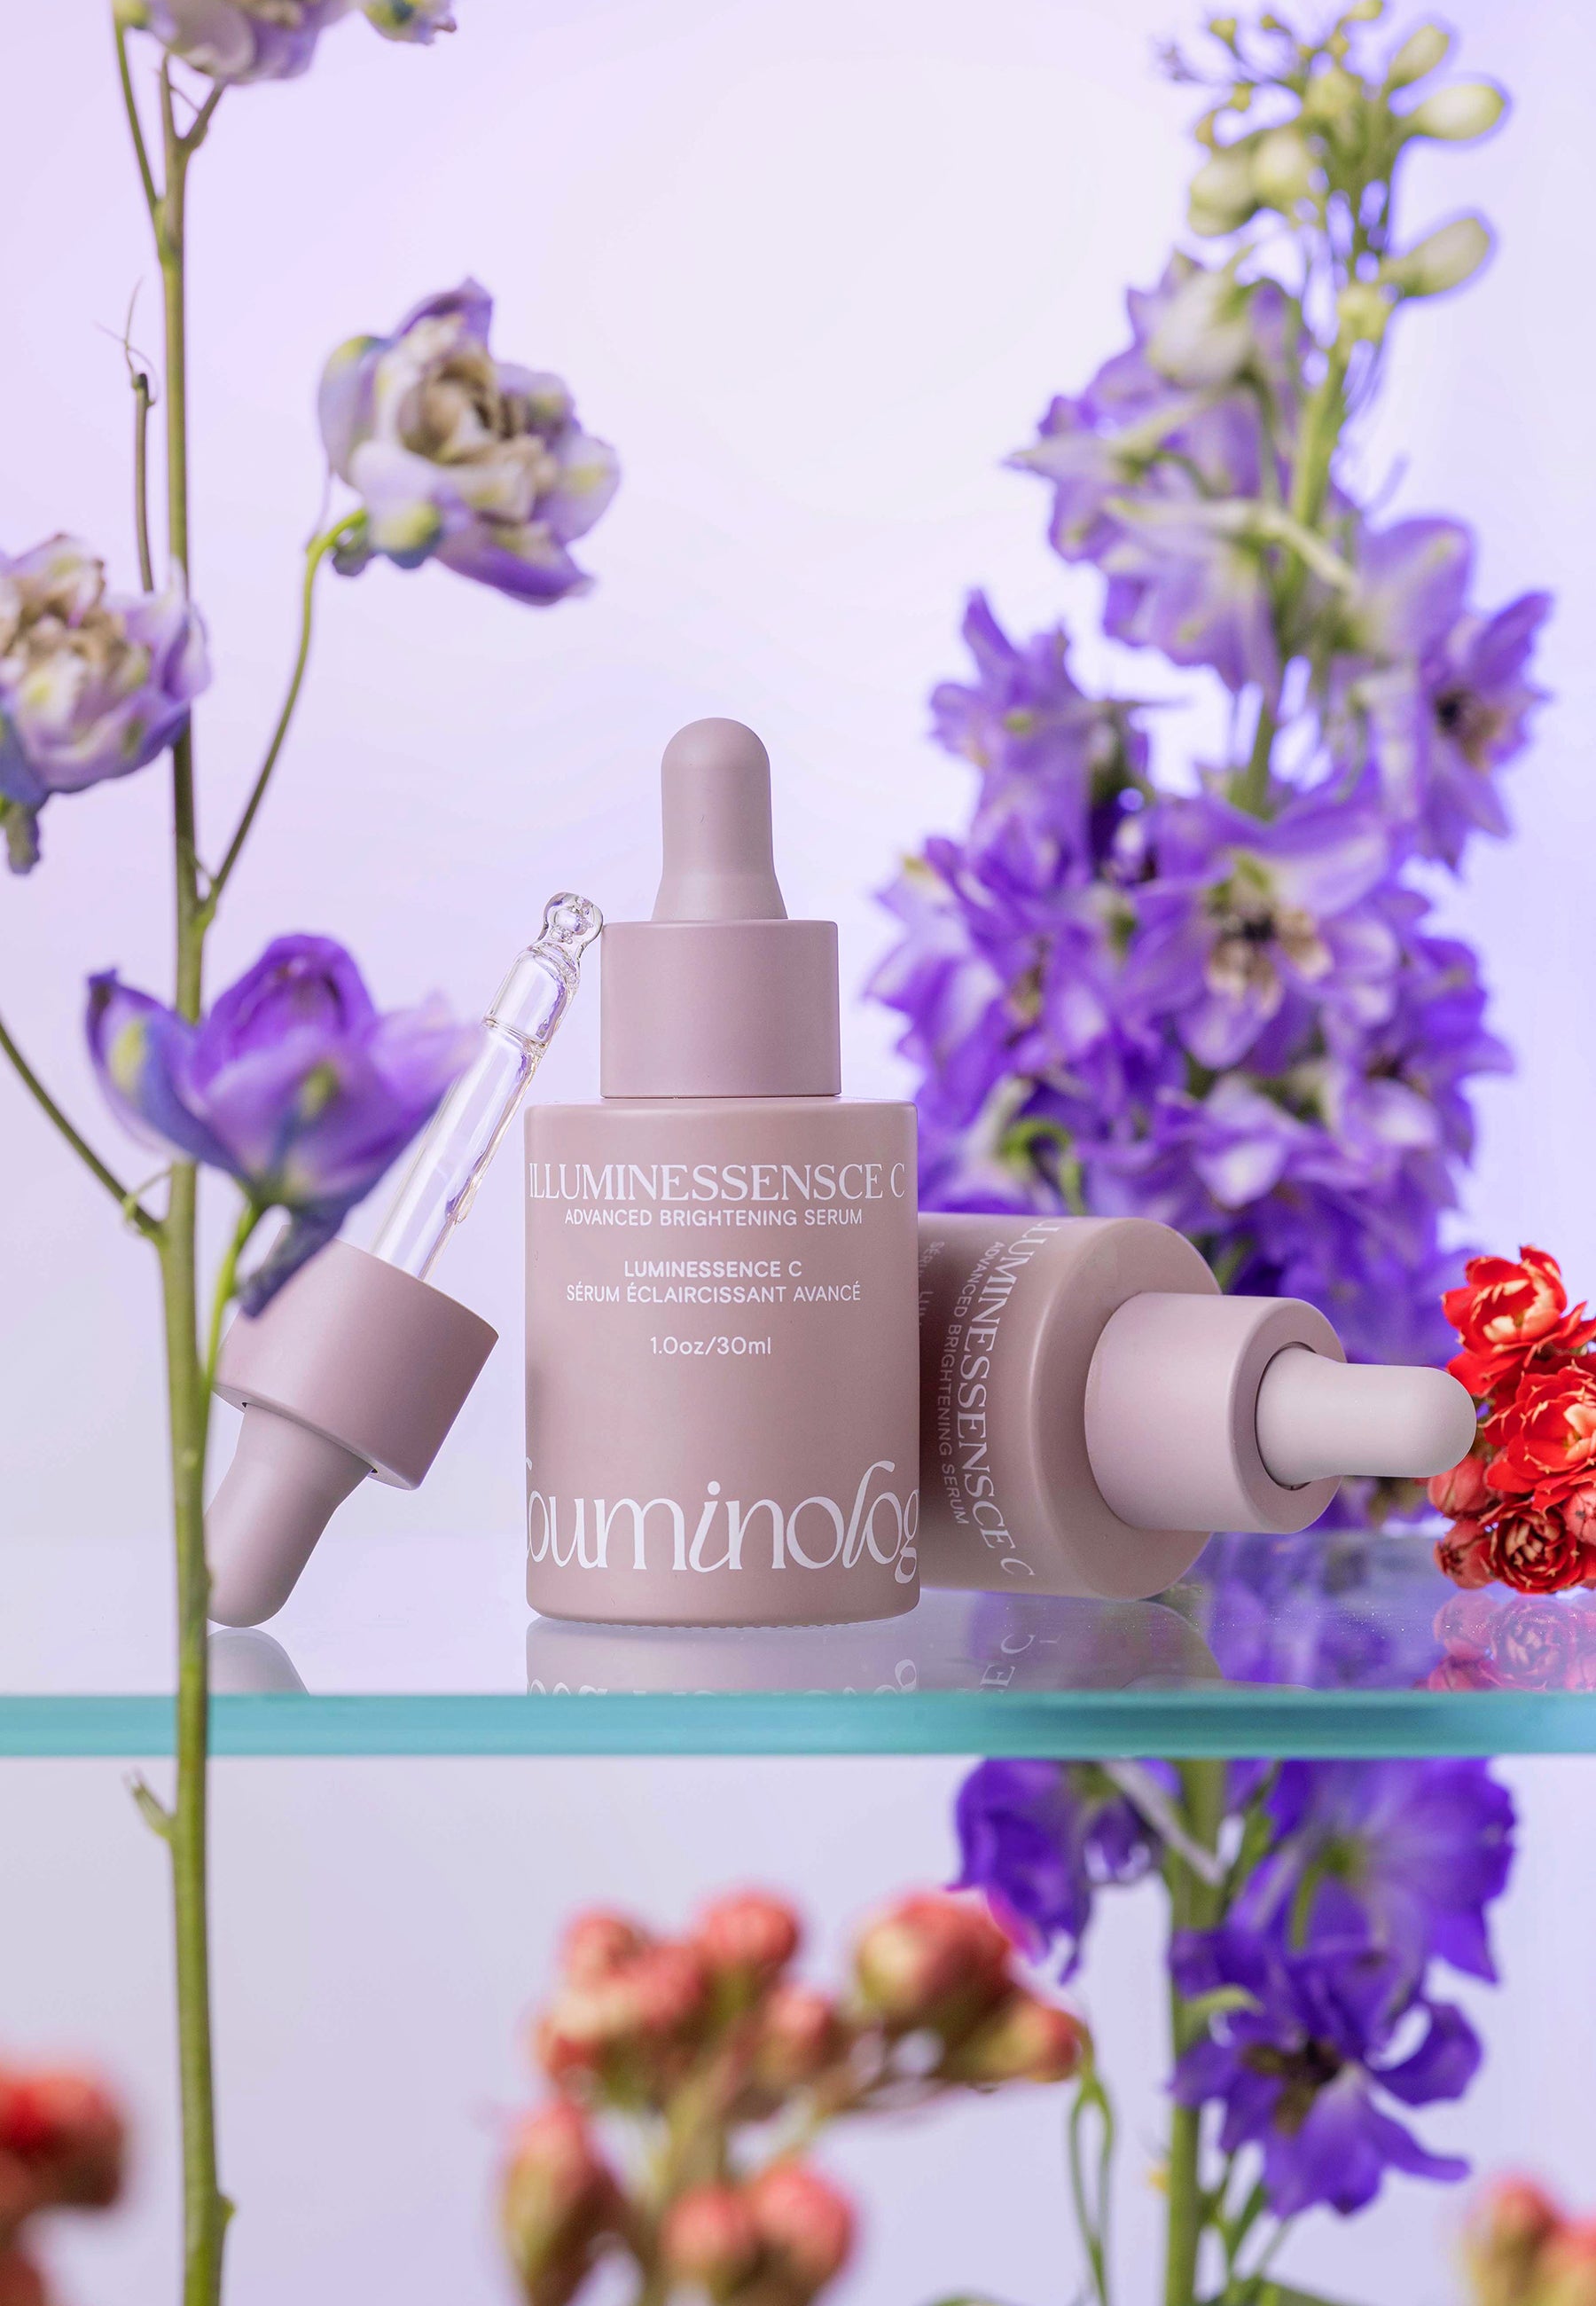 Glowing Reviews: New Nordic — The Conscious Glow Getter